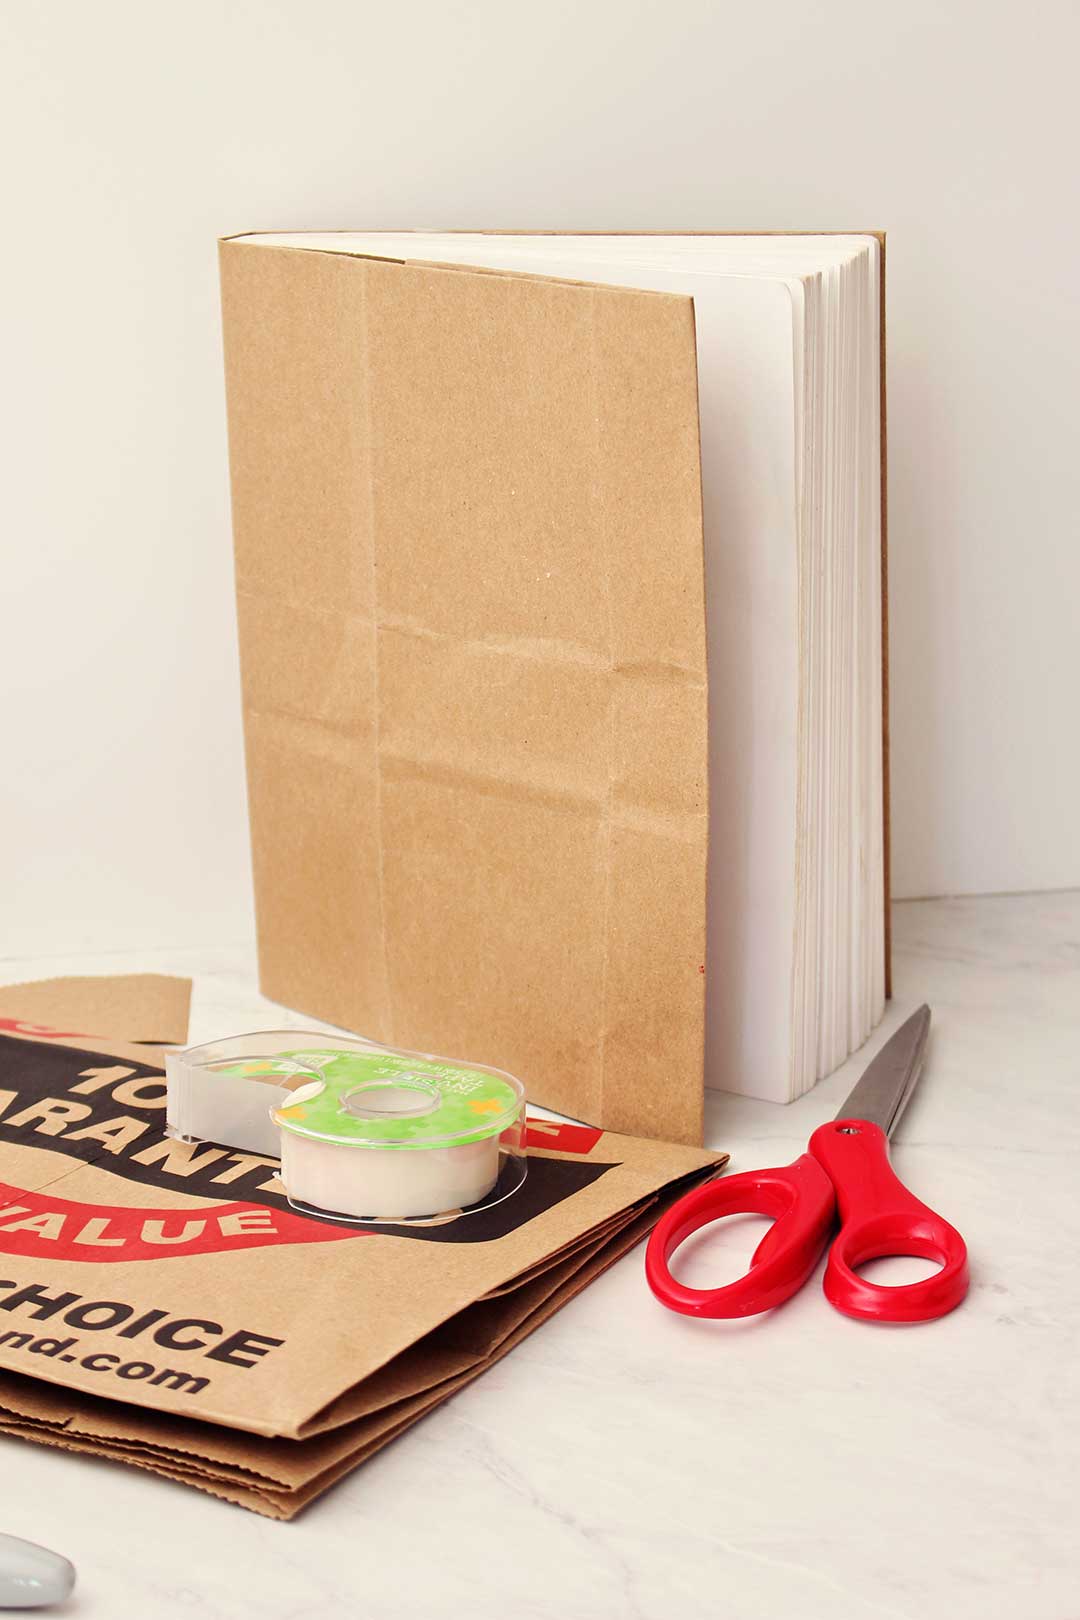 How To Make A Paper Bag Book Cover –